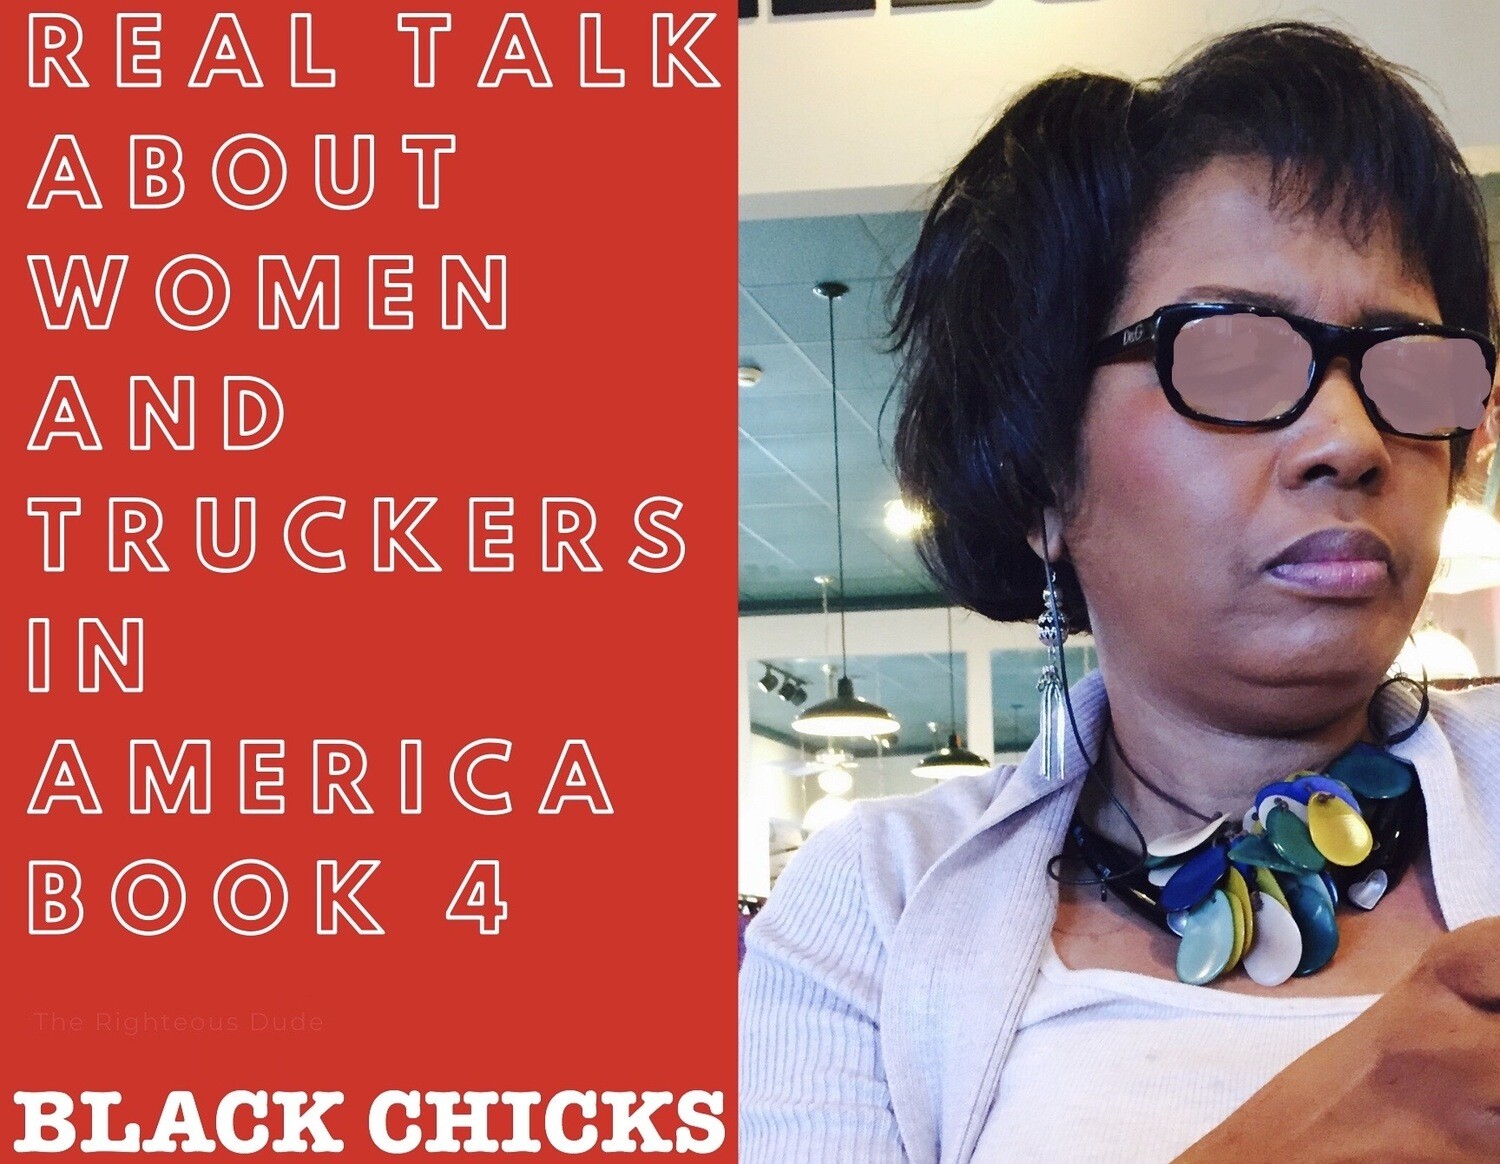 Real Talk About Women And Truckers In America Book 4